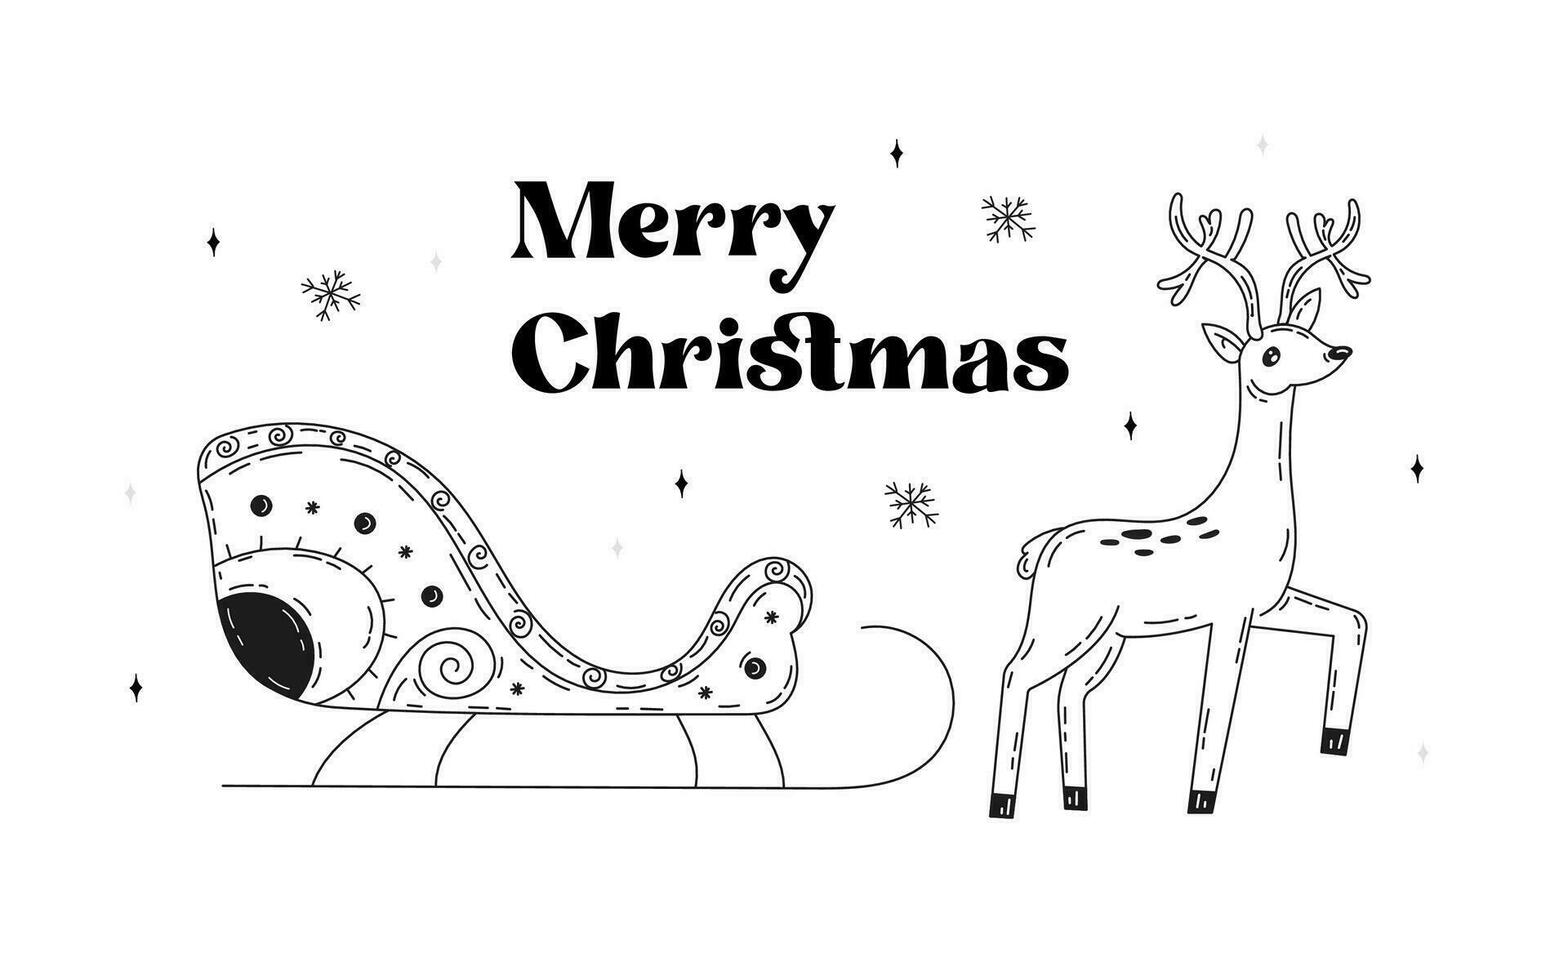 Happy winter holidays postcard. Hand drawn Christmas graphics. Set of holiday elements for design. Christmas card with deer and sleigh in doodle style. Vector stock illustration on white background.